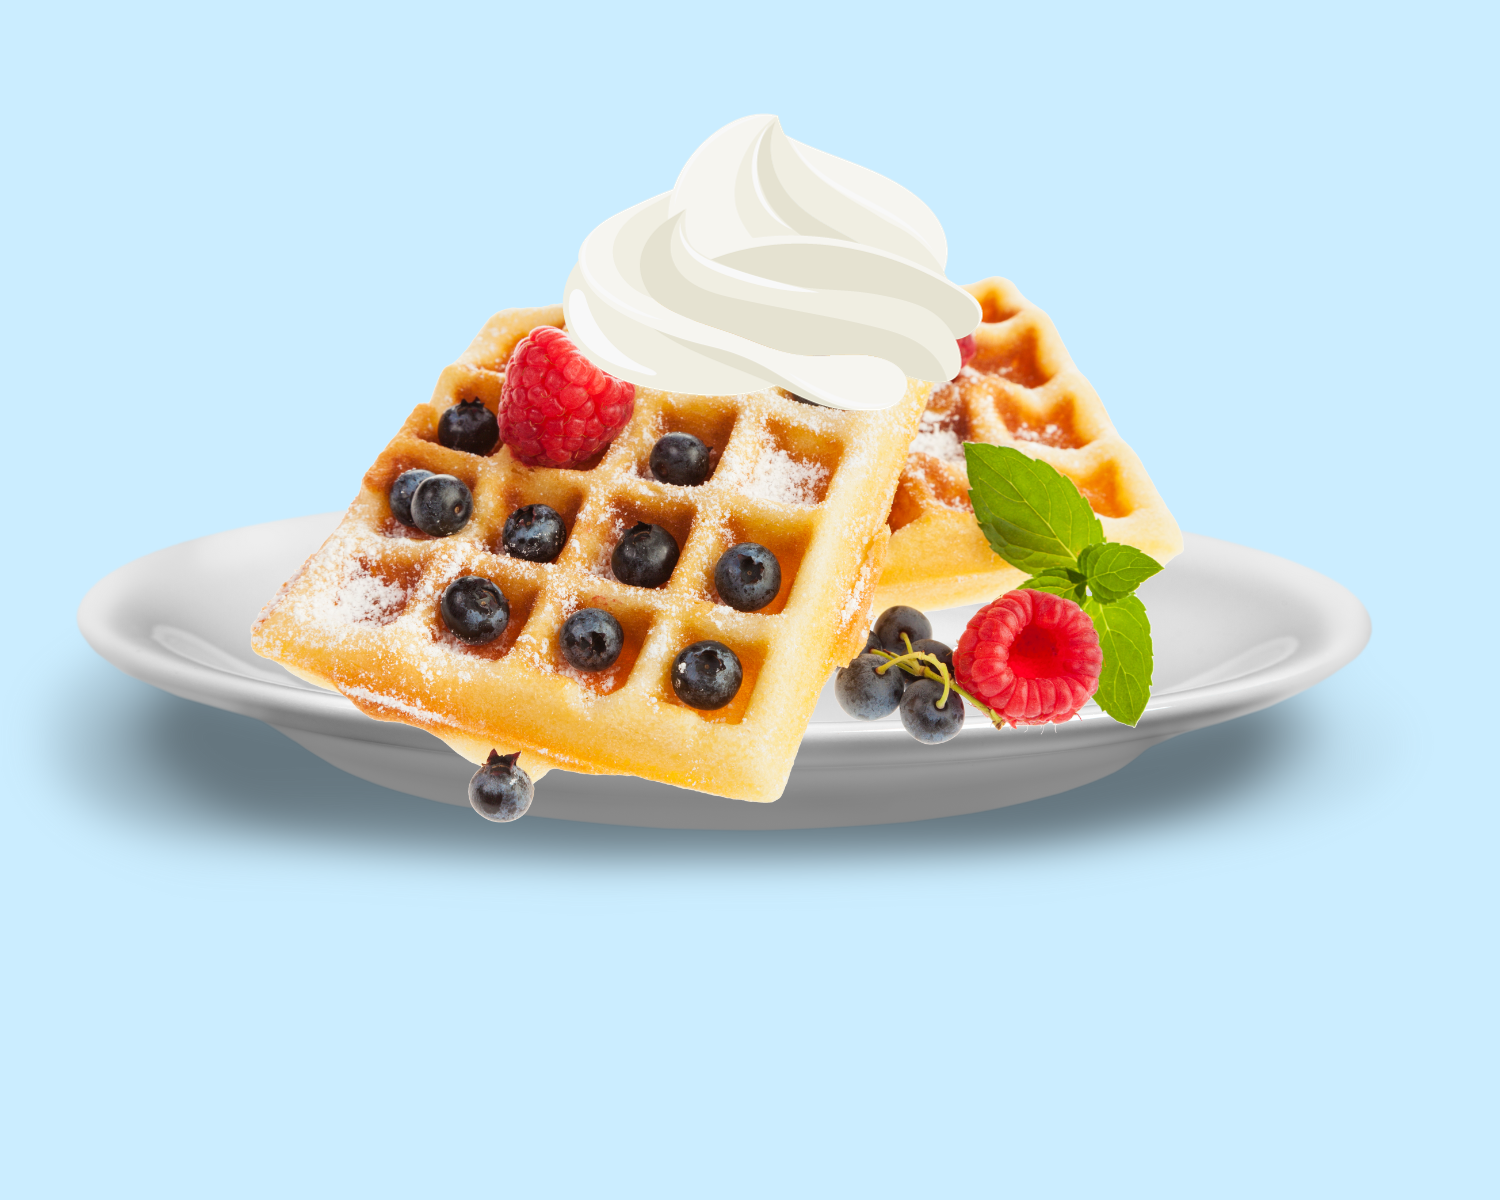 Picture of waffles with berries and whipped cream on top.